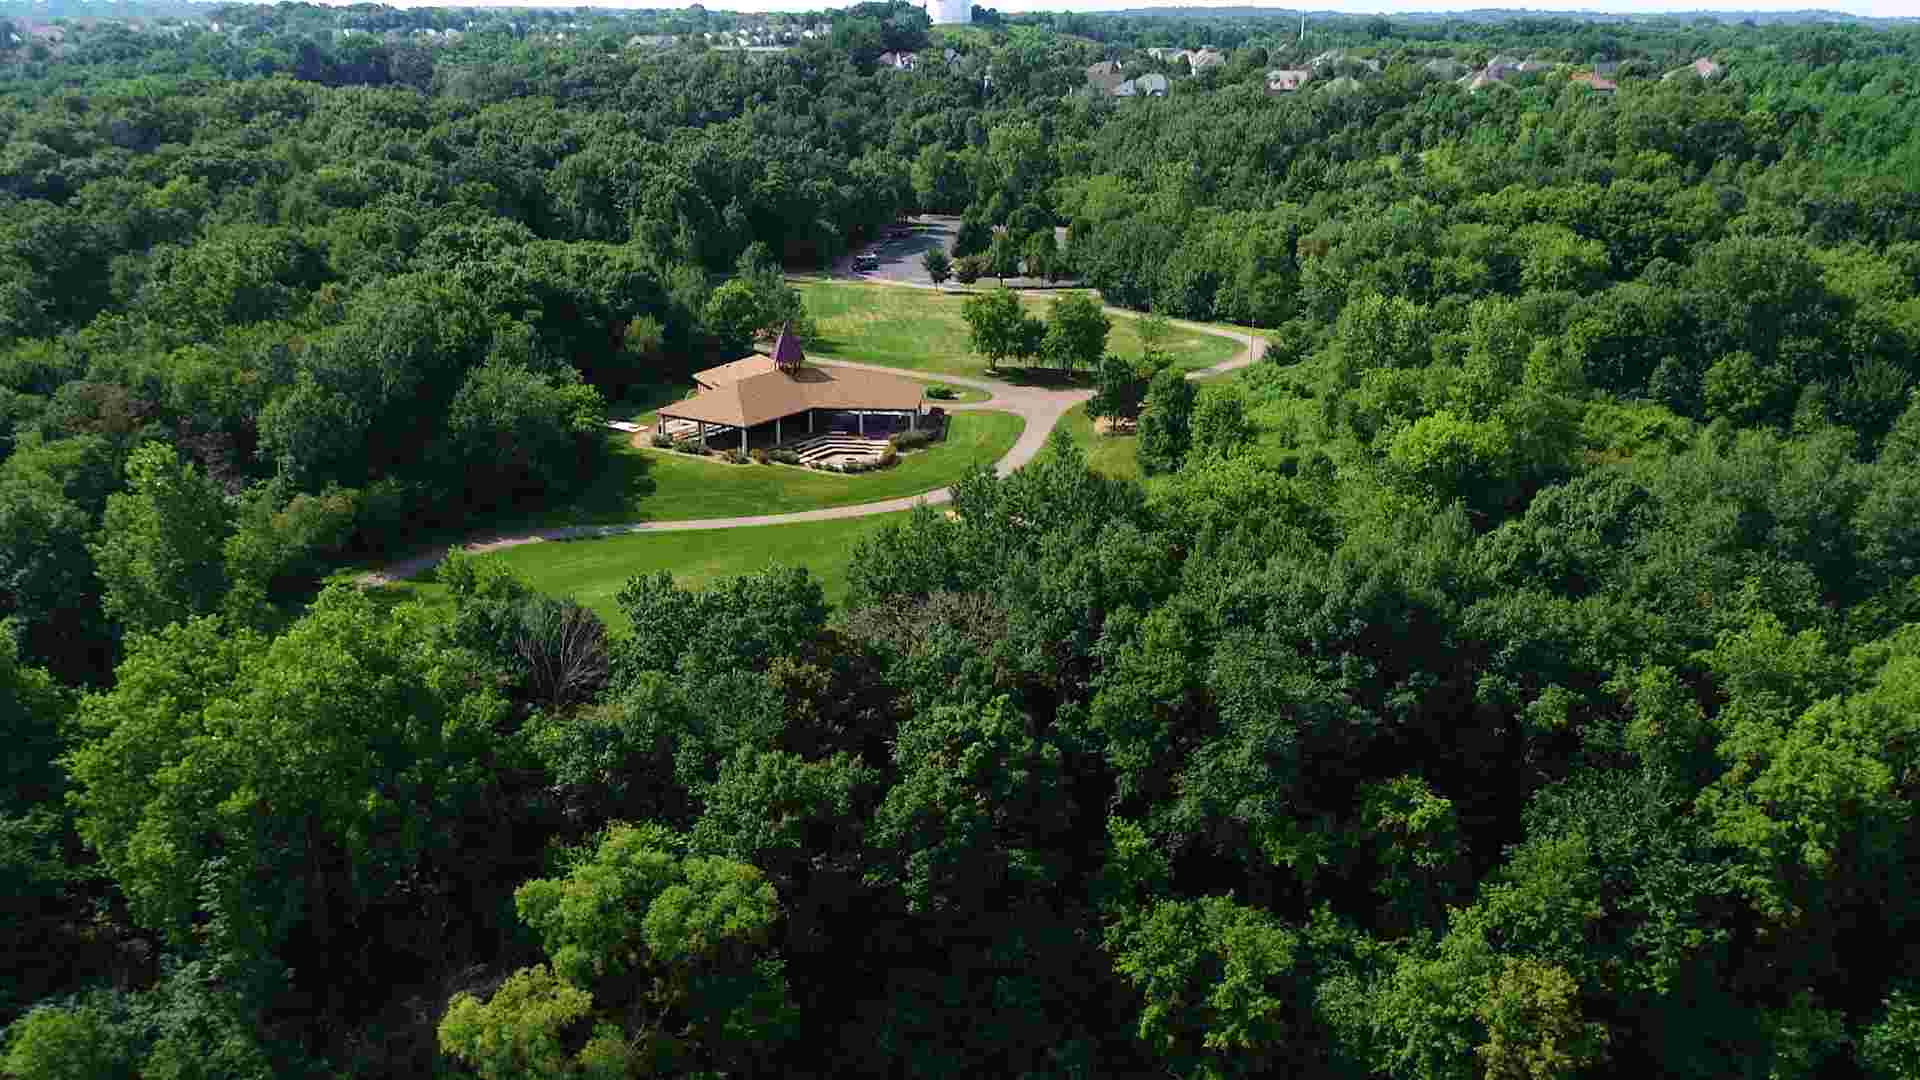 drone shot of Eagan park with dense tree canopy